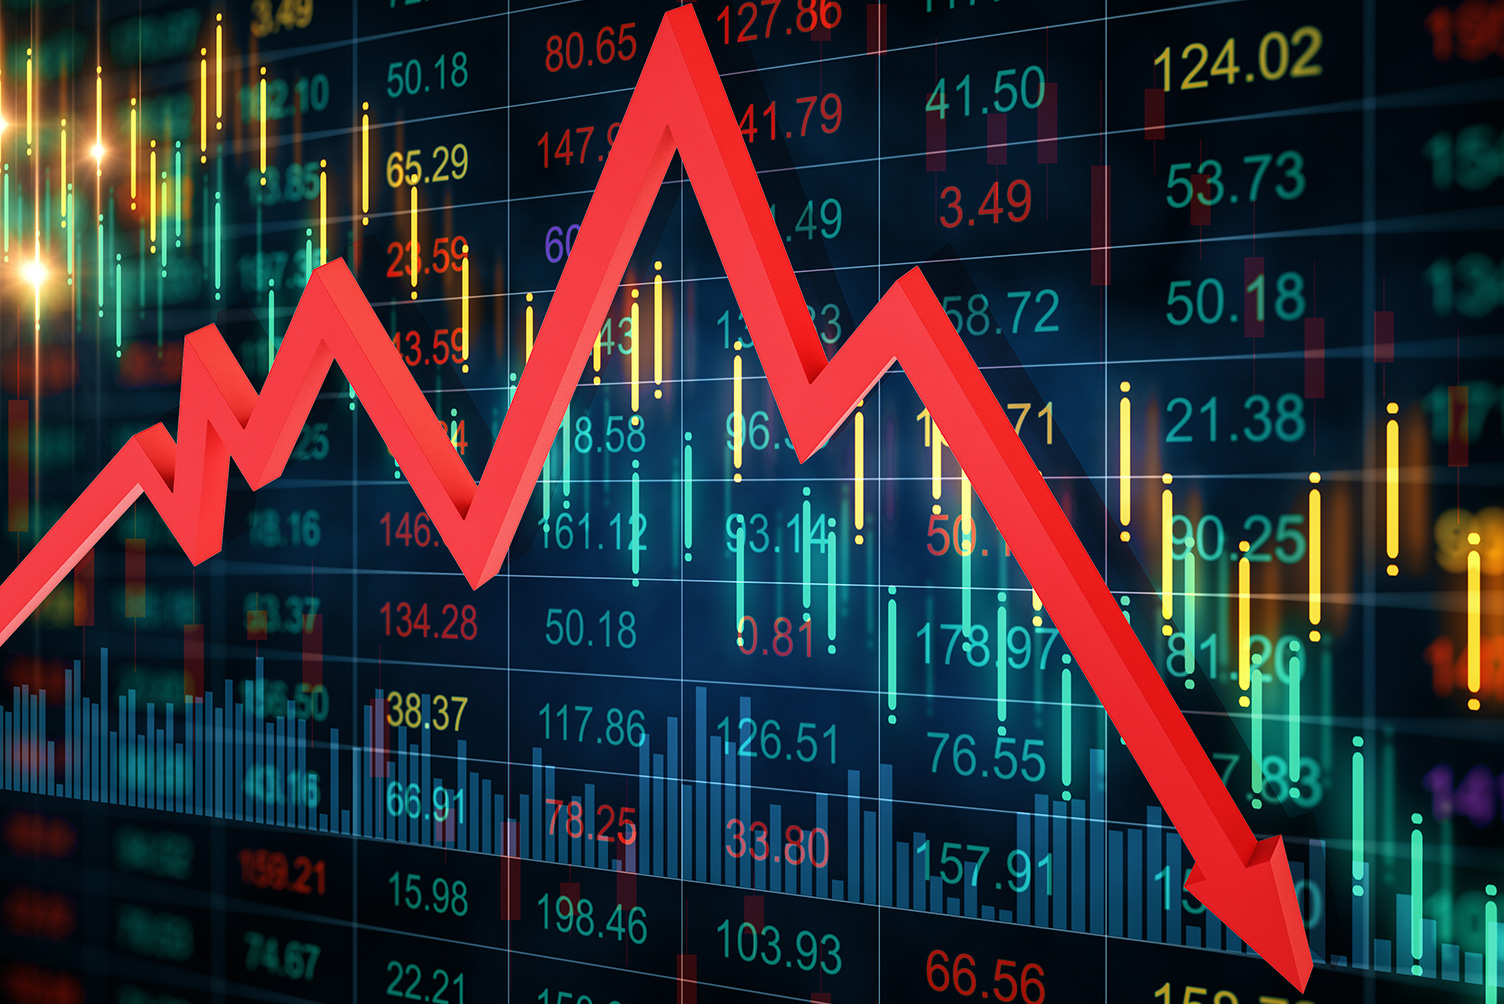 The following 3 stocks fared the worst amid Friday's decline